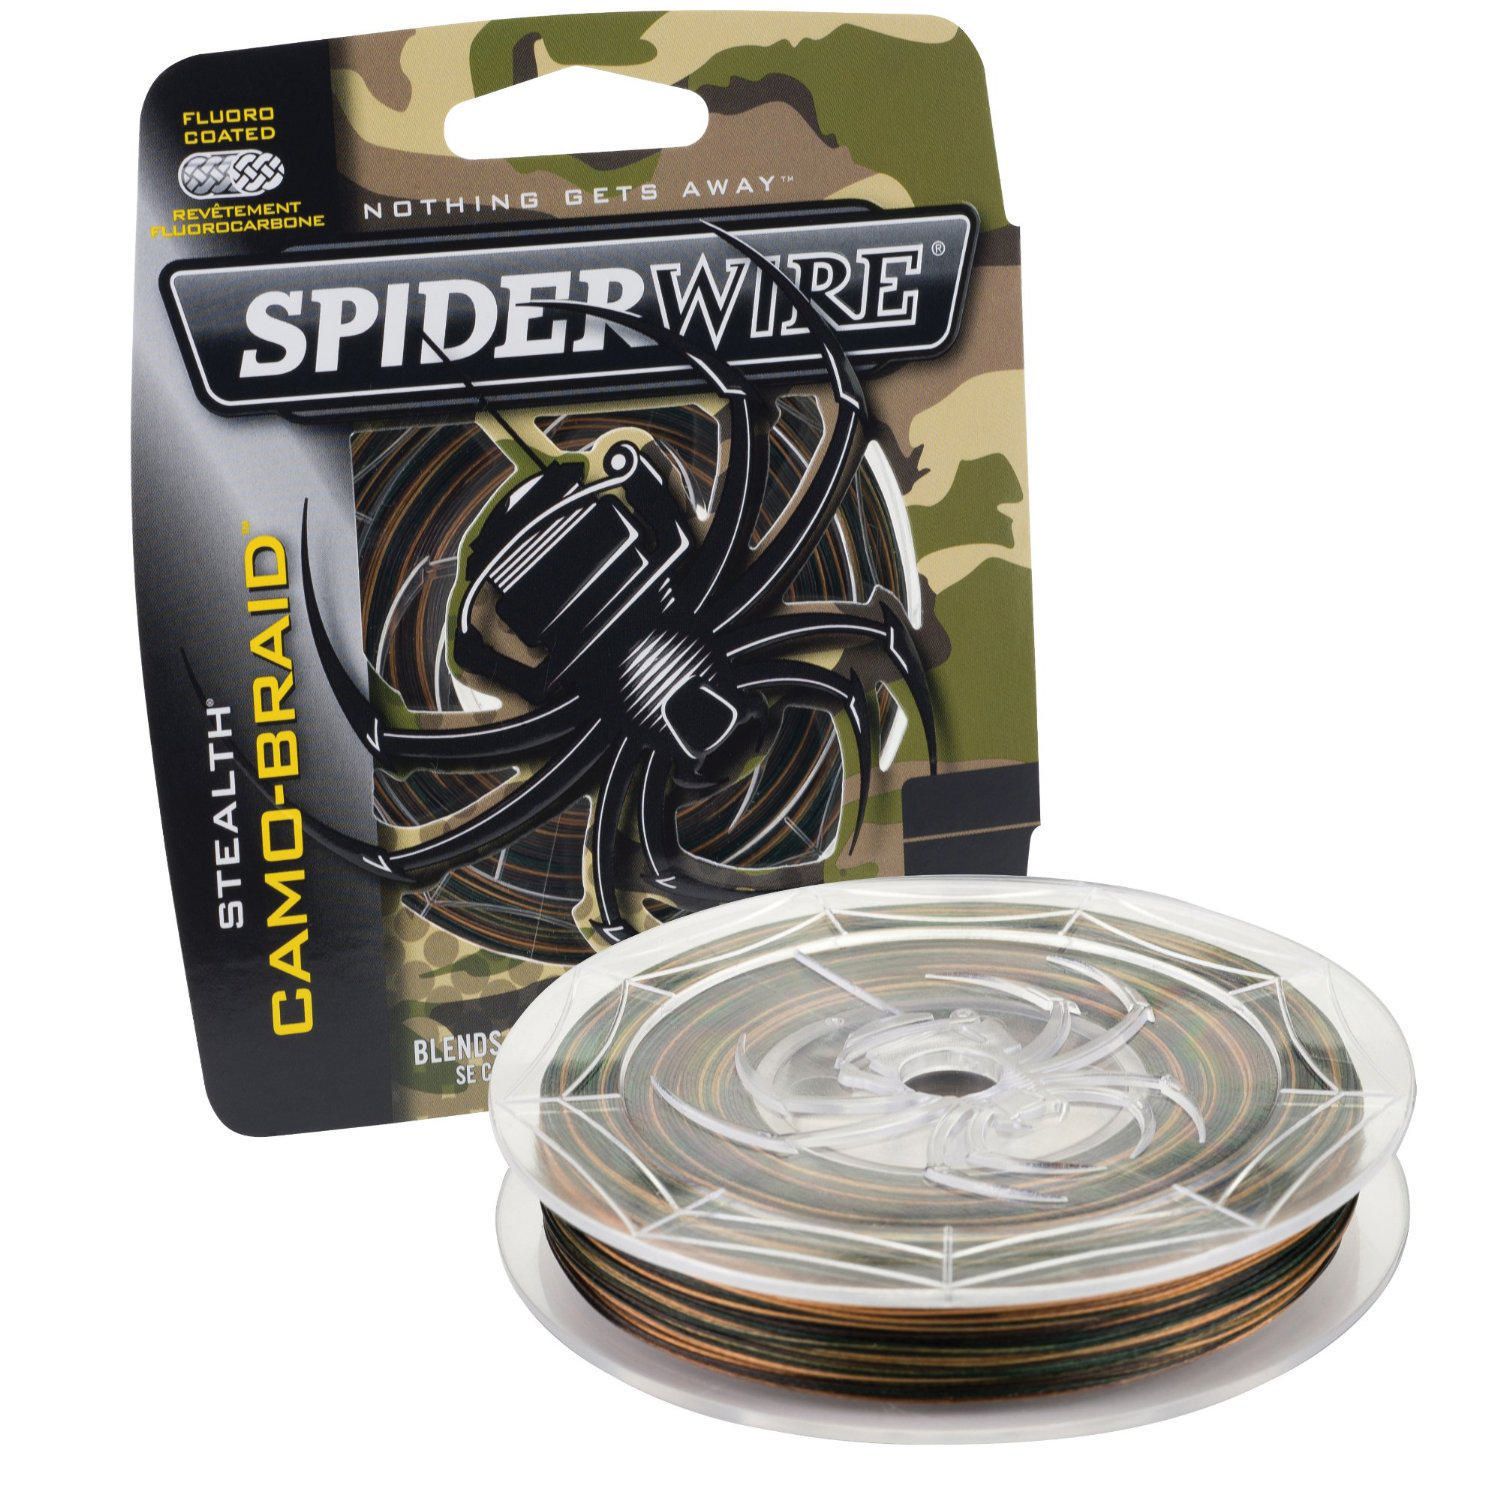 Spiderwire Stealth Braid Fishing Line, 50 lb, super strong with